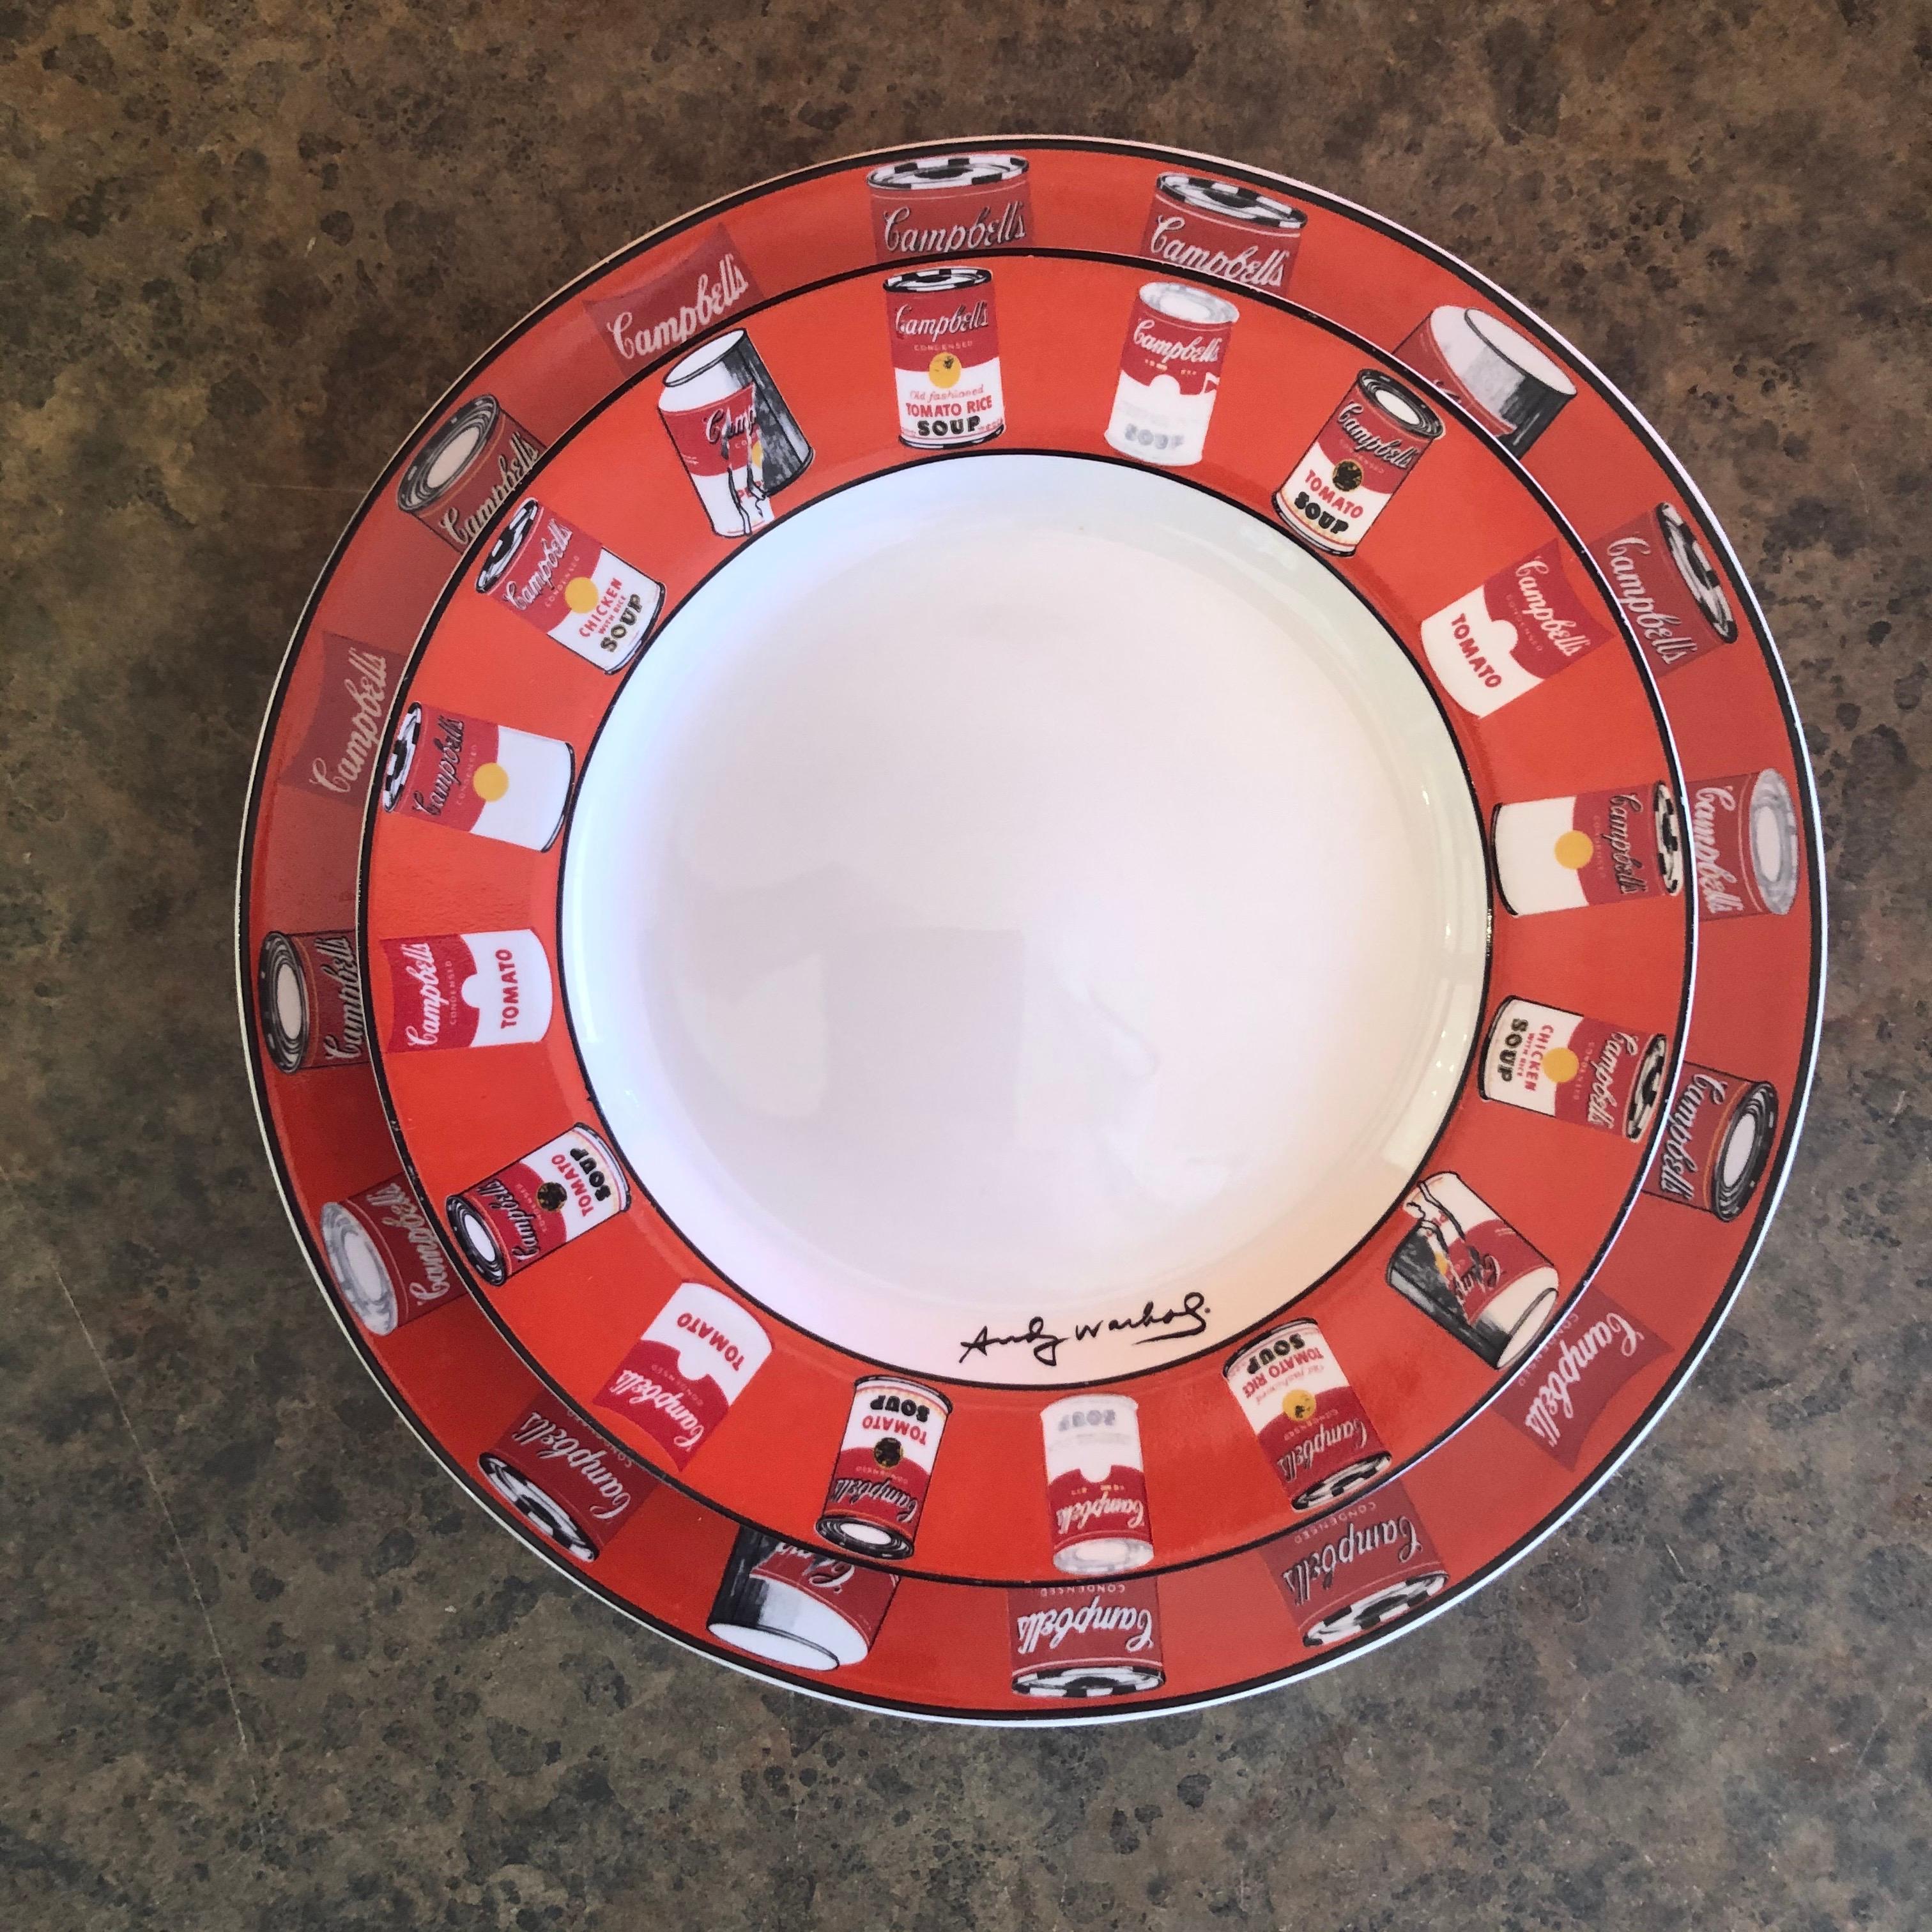 andy warhol campbell soup plates